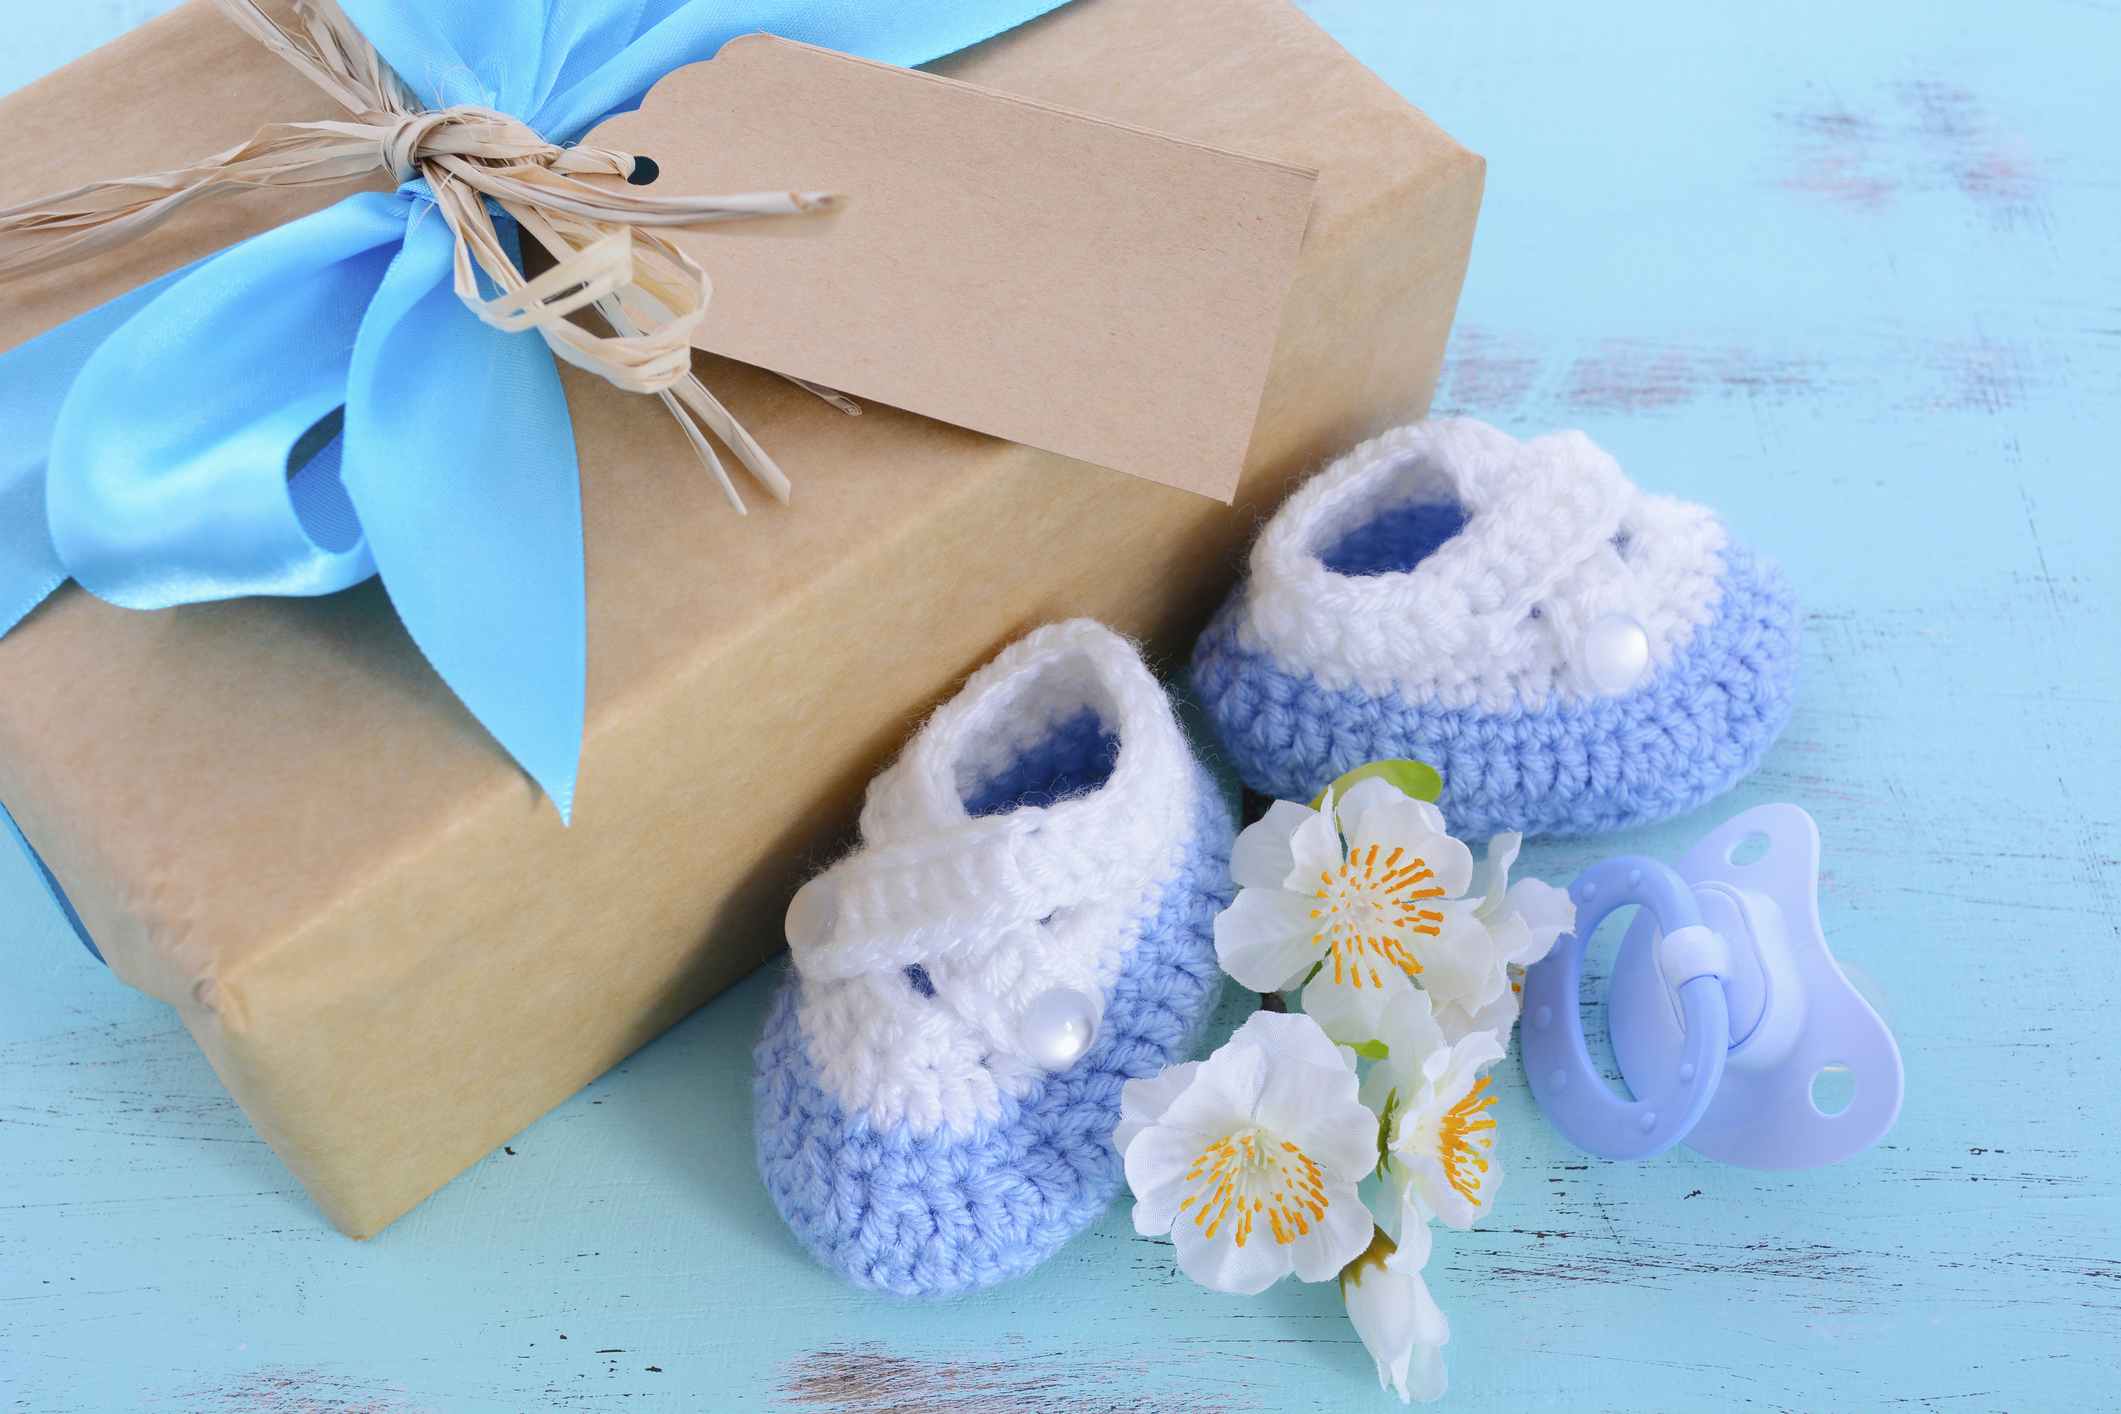 A baby gift box with a bow next to some booties and a pacifier on a table.